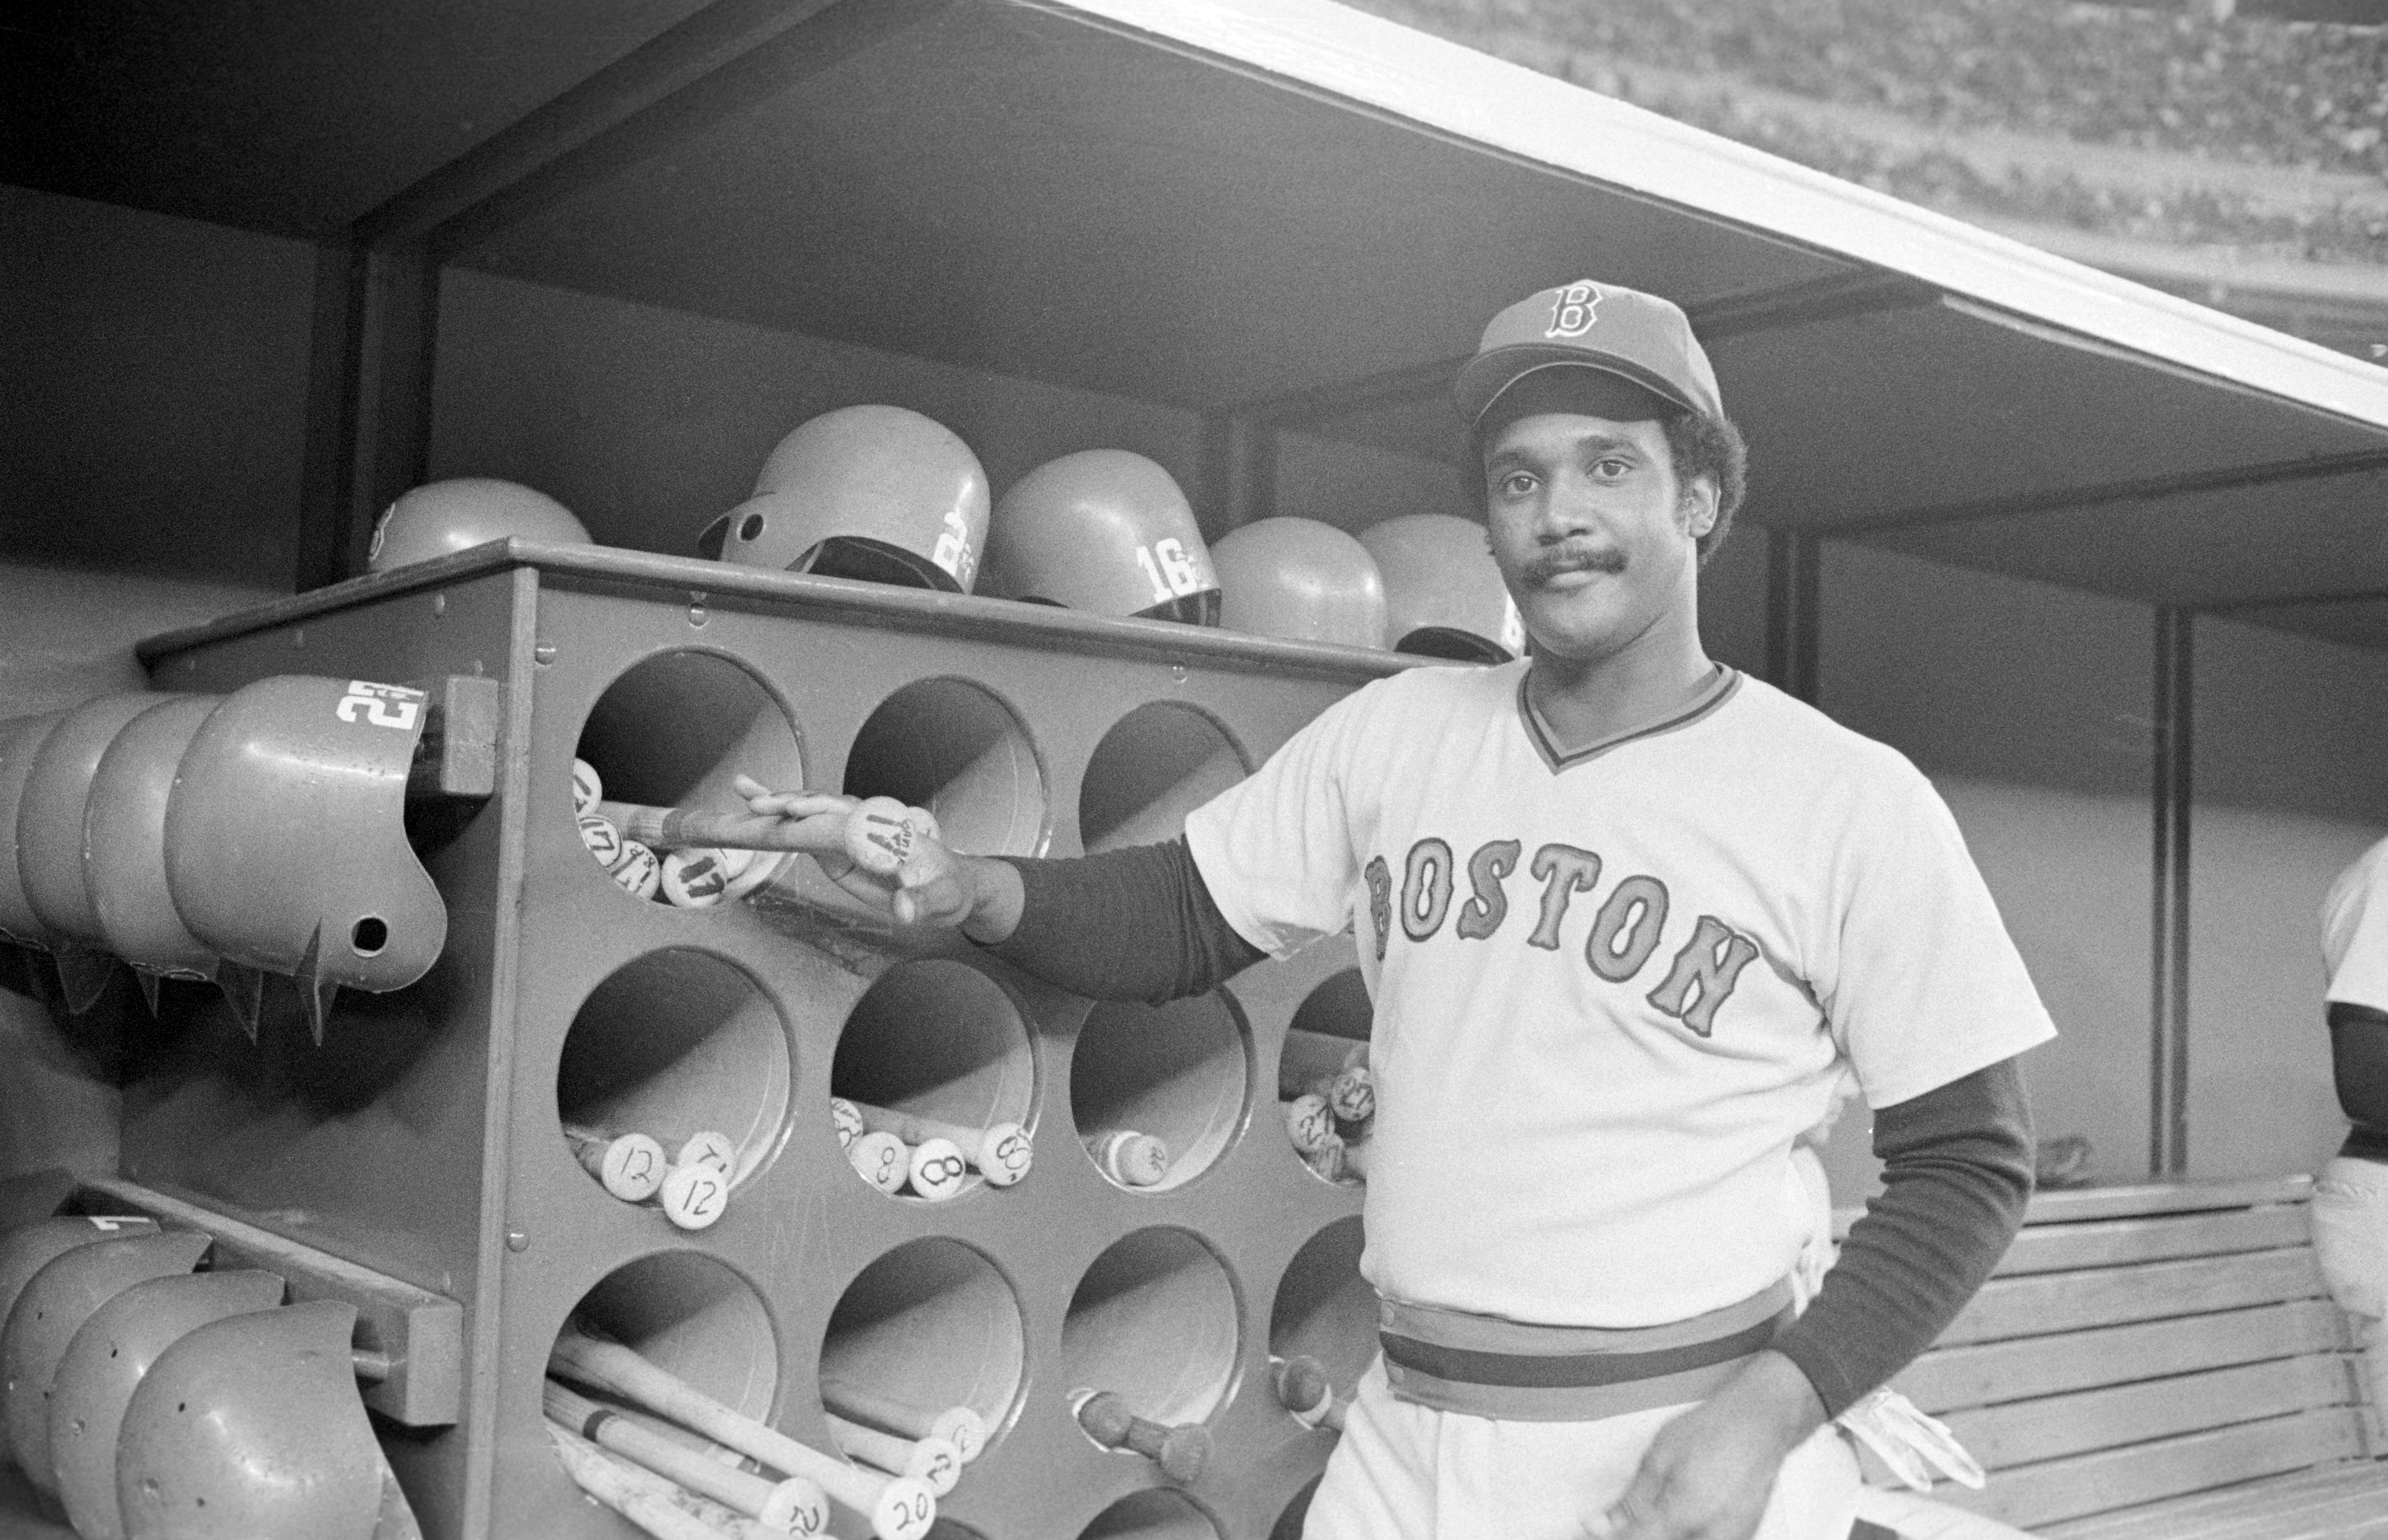 Jim Rice in the Dugout